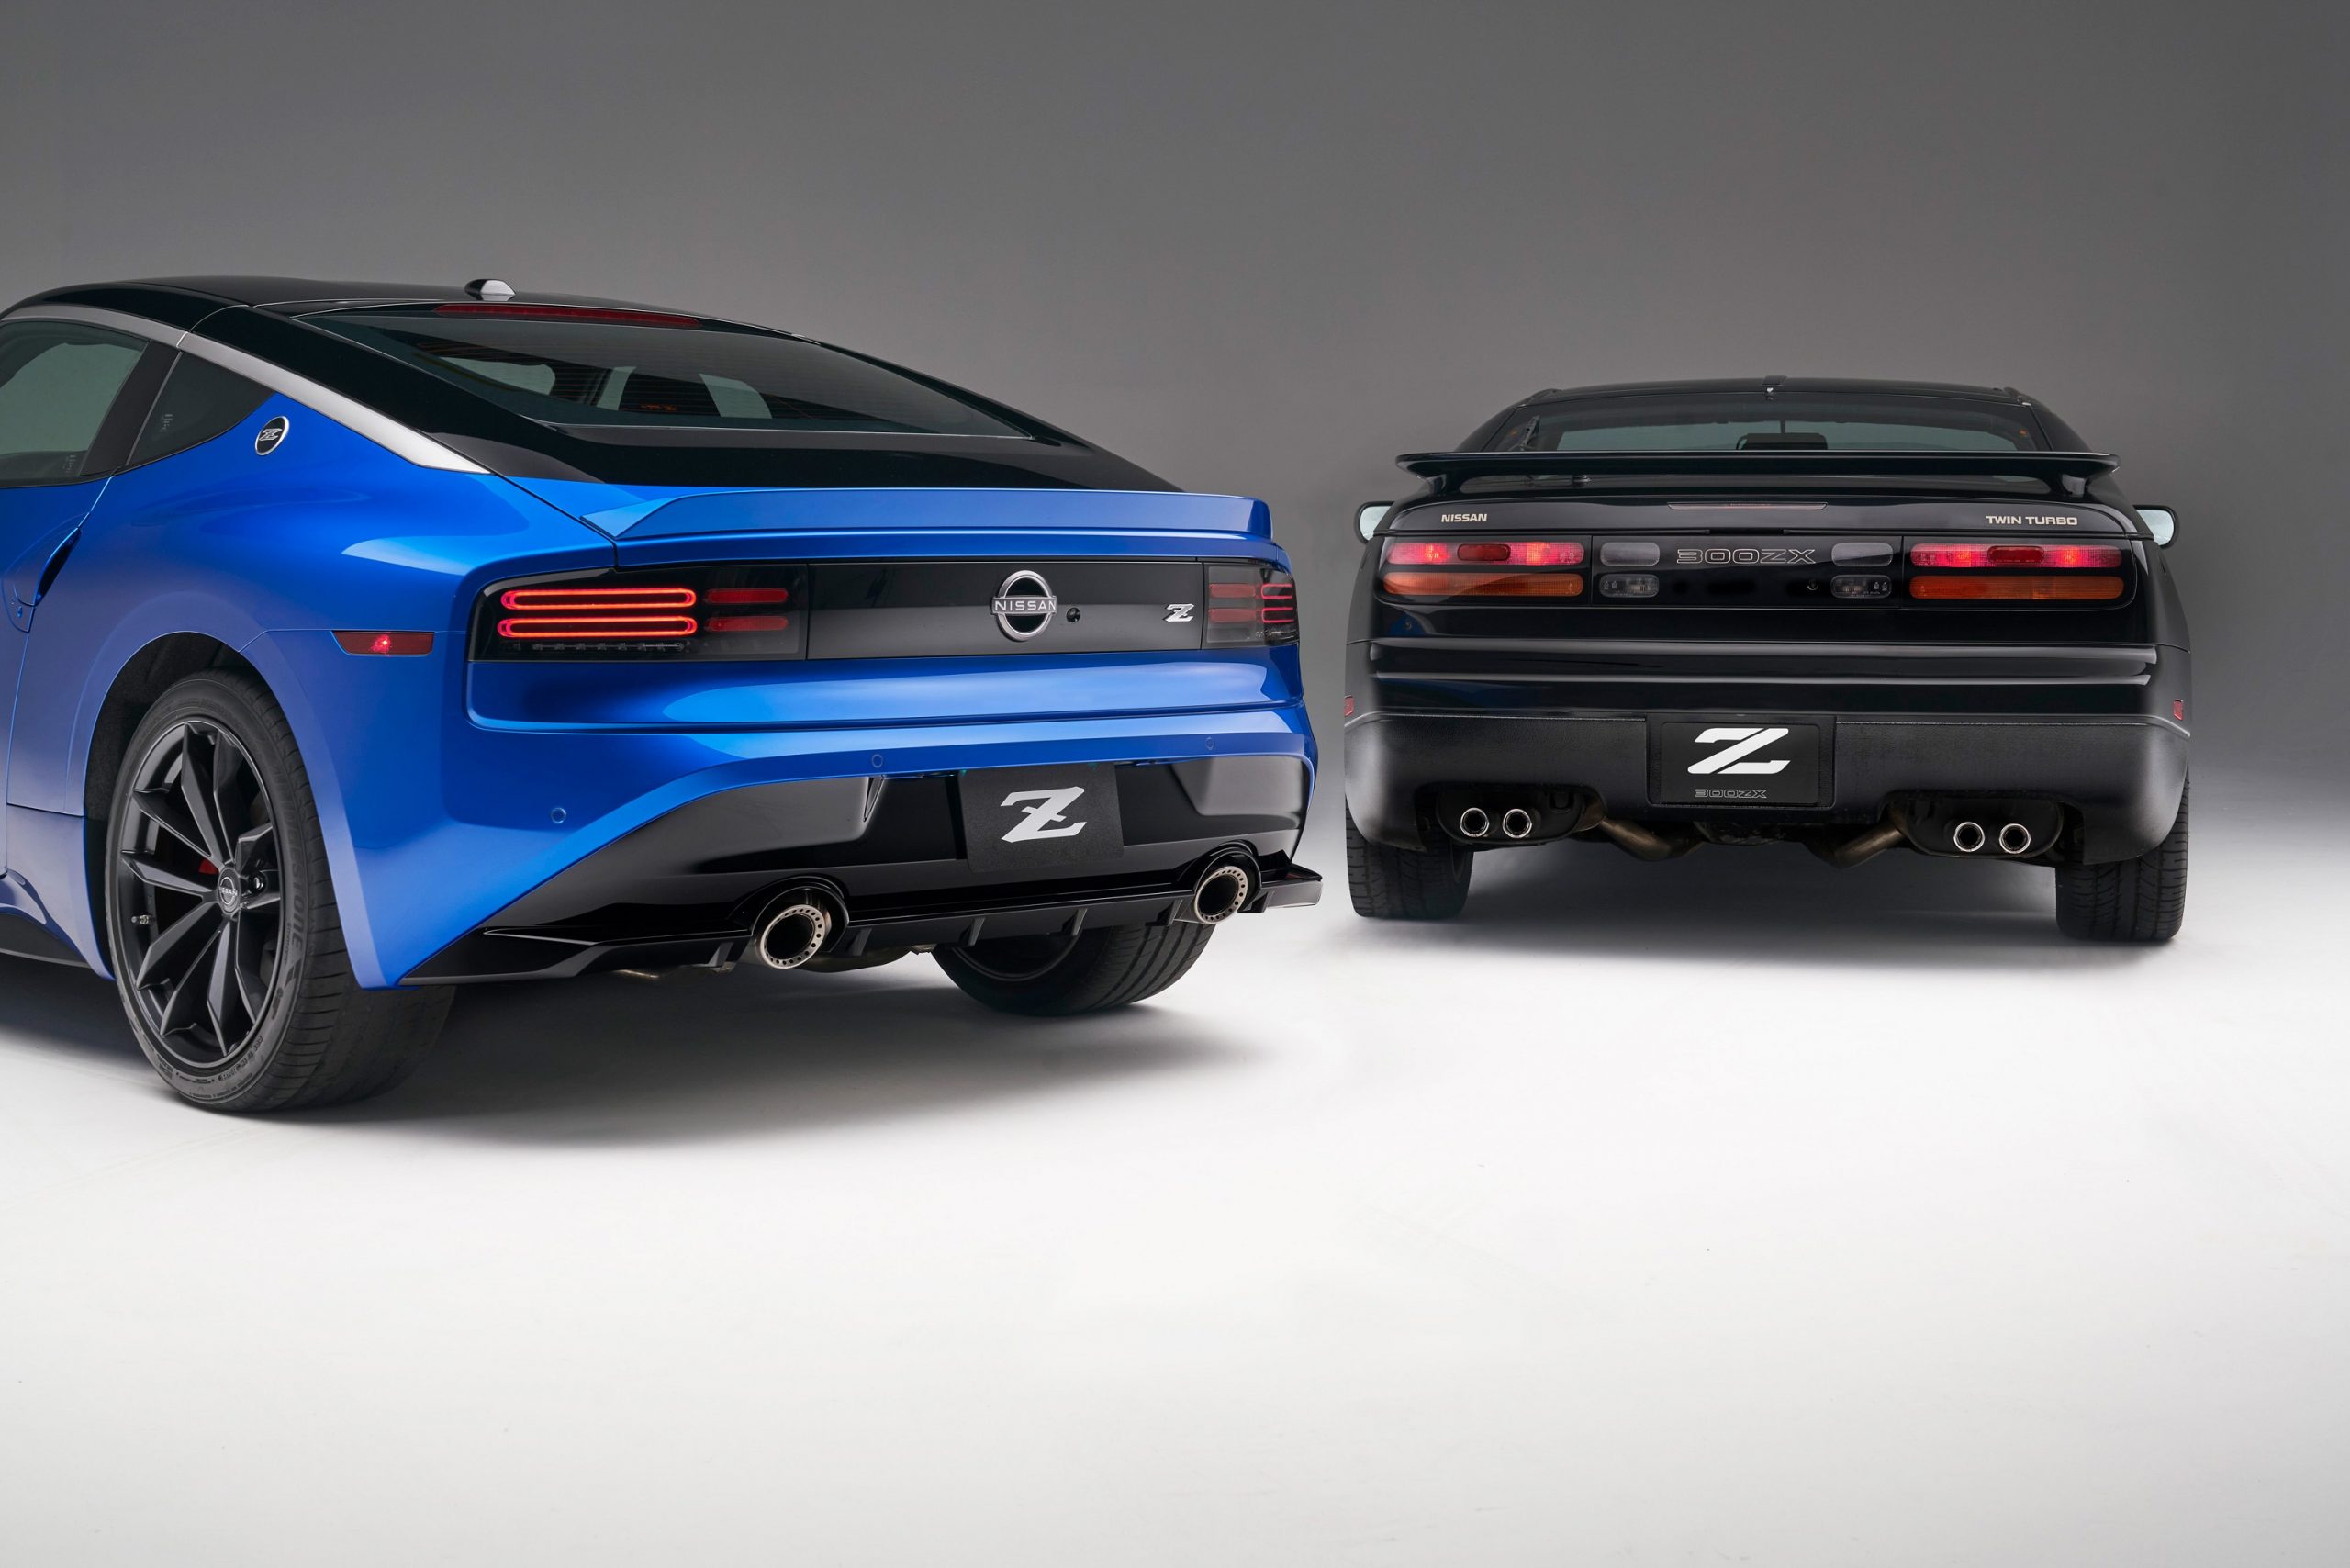 The rear of the Nissan 300ZX next to the 2023 Nissan Z in blue